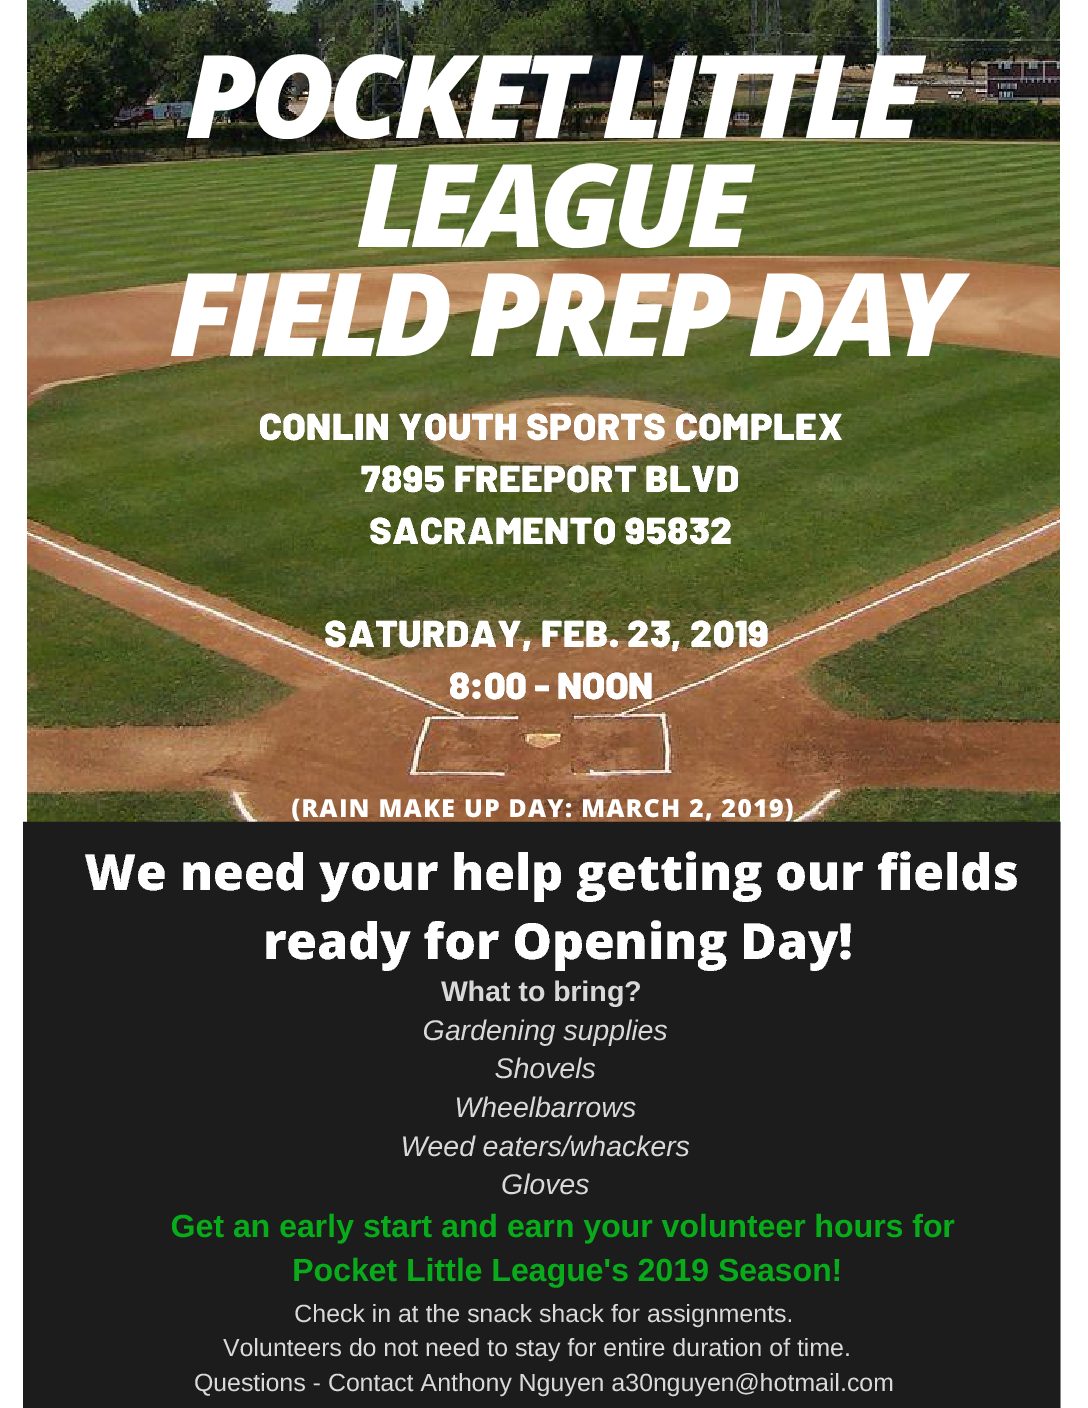 Field Prep Day is Saturday, February 23rd 2019